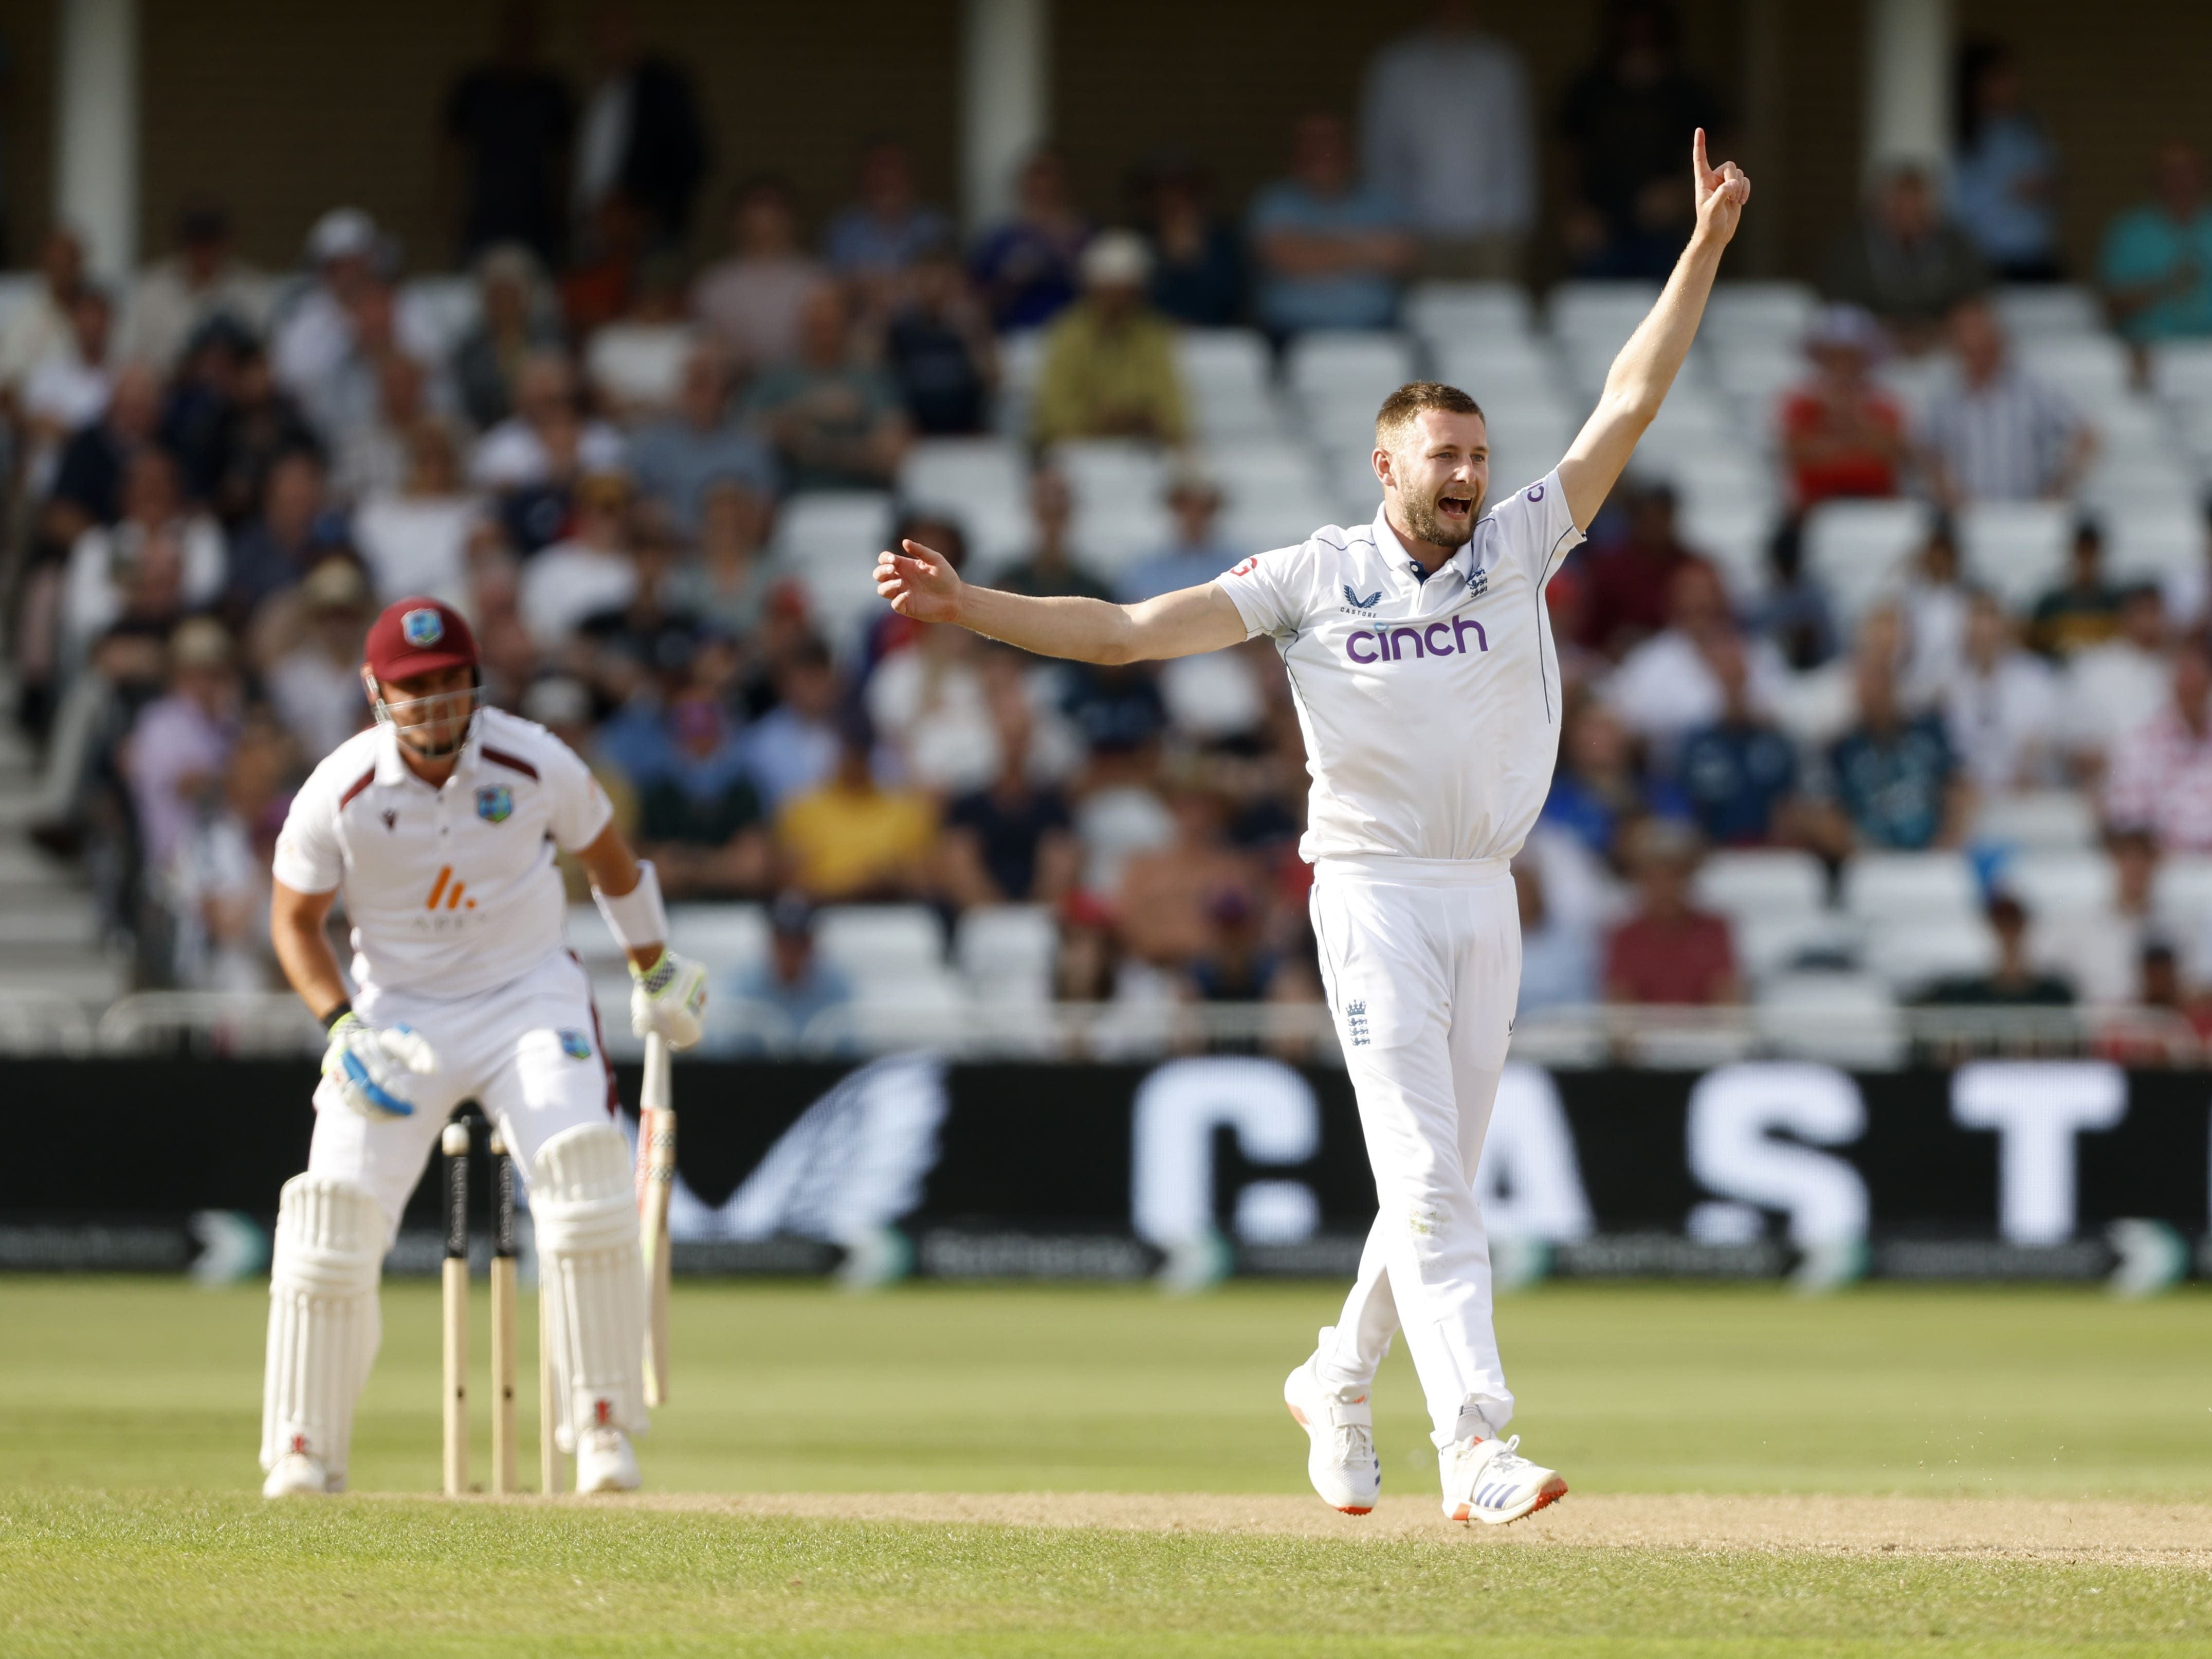 England lose three late wickets after Gus Atkinson helps peg back West Indies